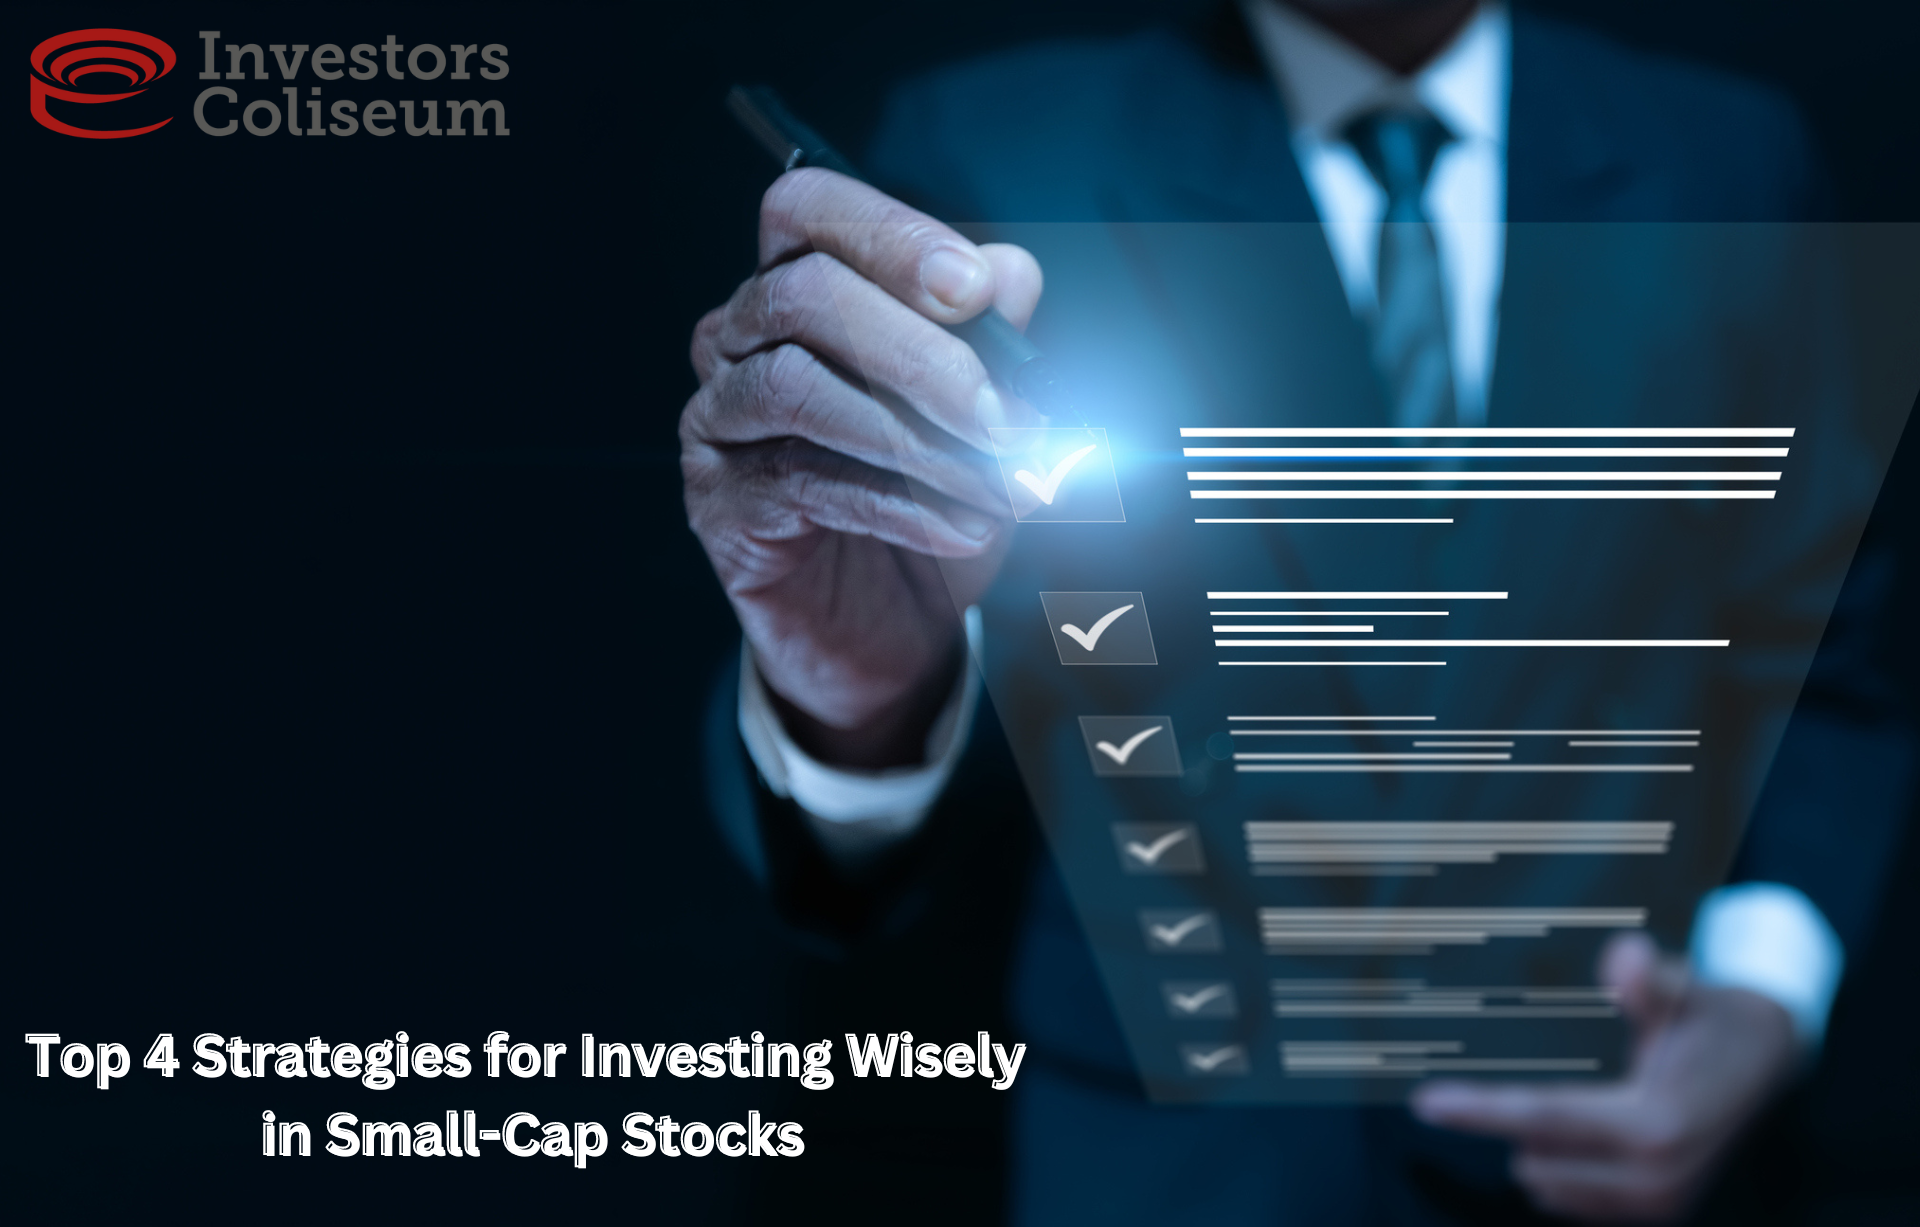 Top 4 Strategies for Investing Wisely in Small-Cap Stocks